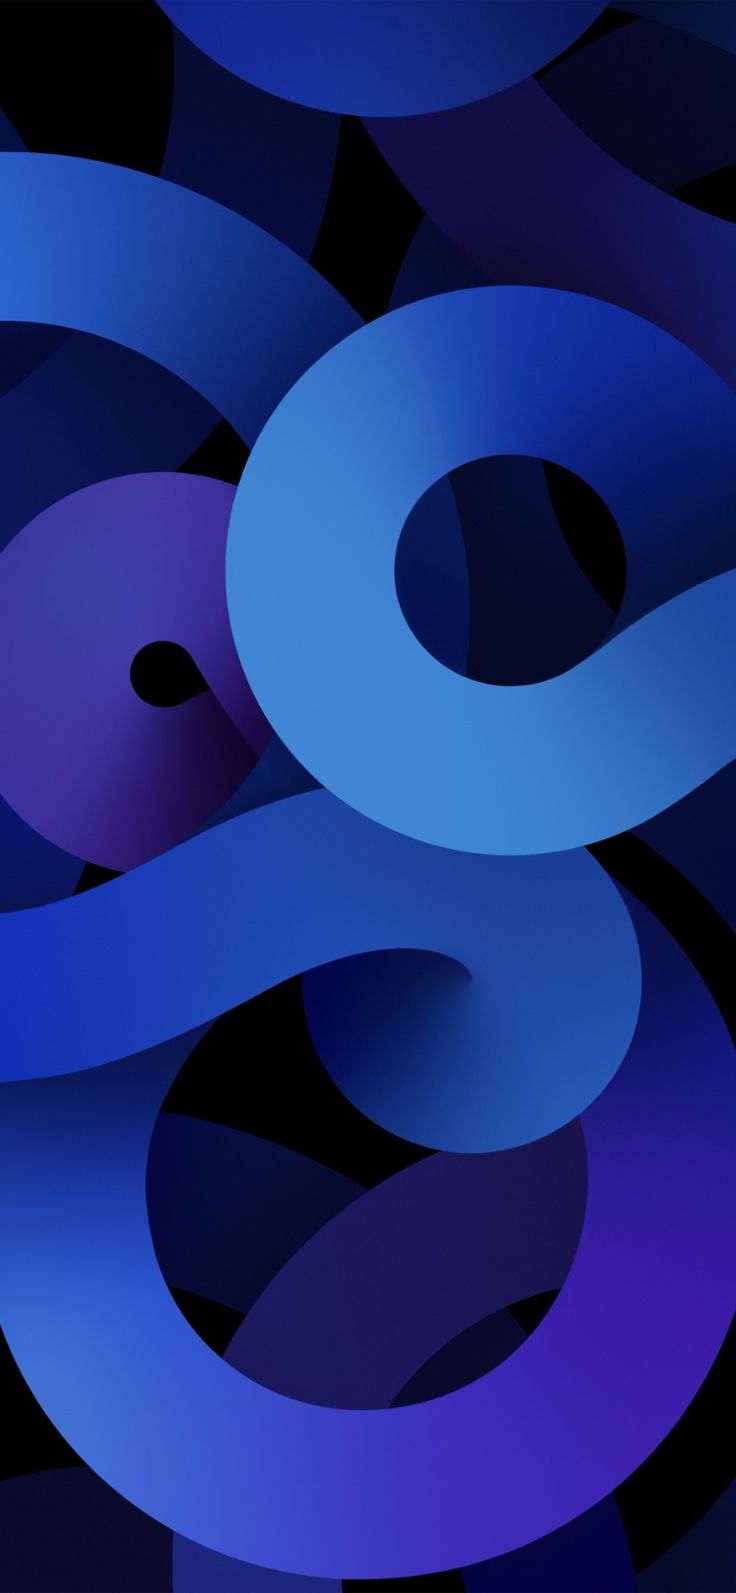 an abstract blue and purple background with circles in the shape of letters that appear to be interlocked